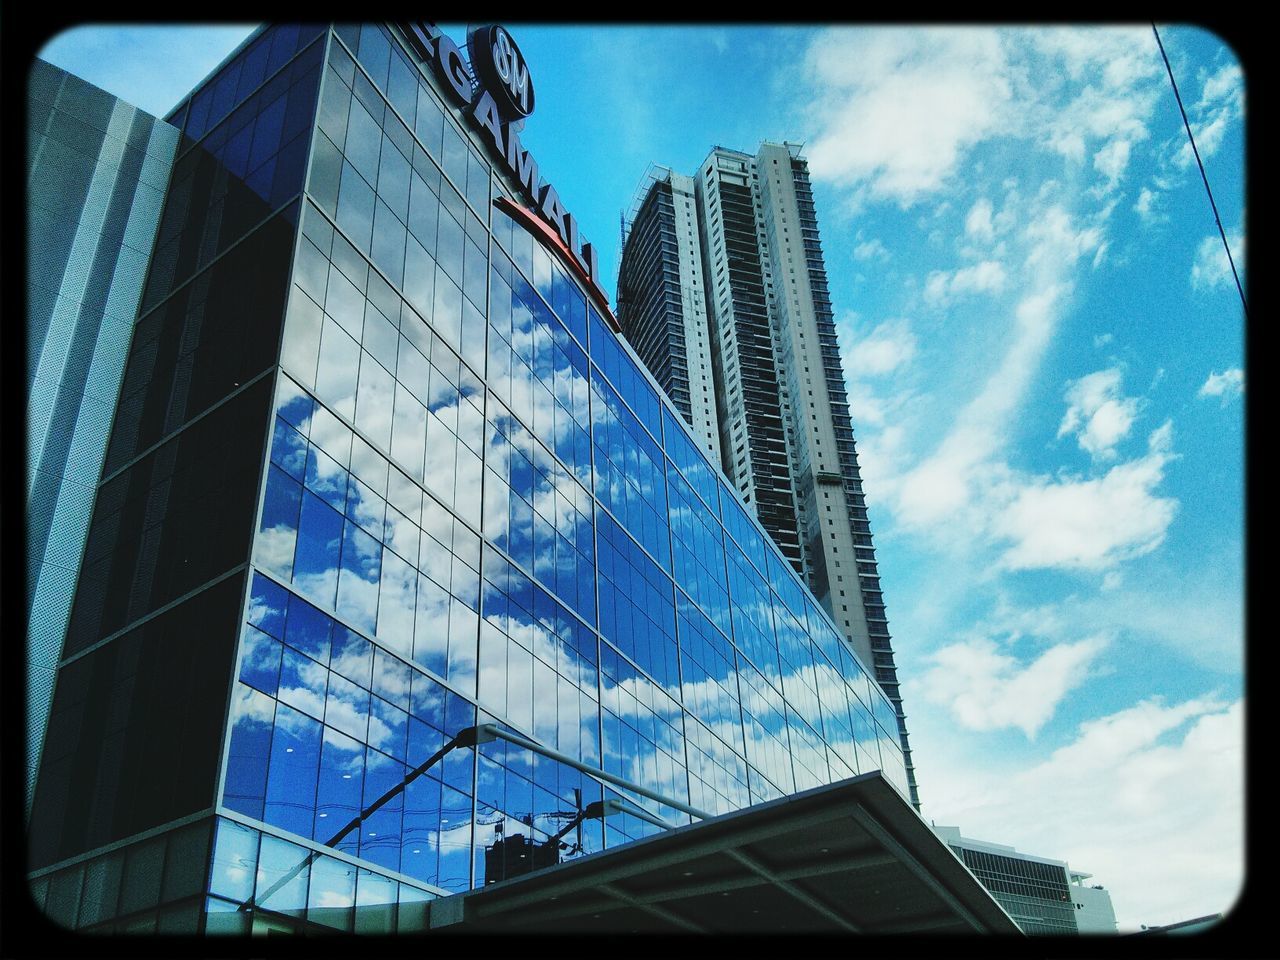 LOW ANGLE VIEW OF MODERN BUILDING AGAINST CLOUDY SKY